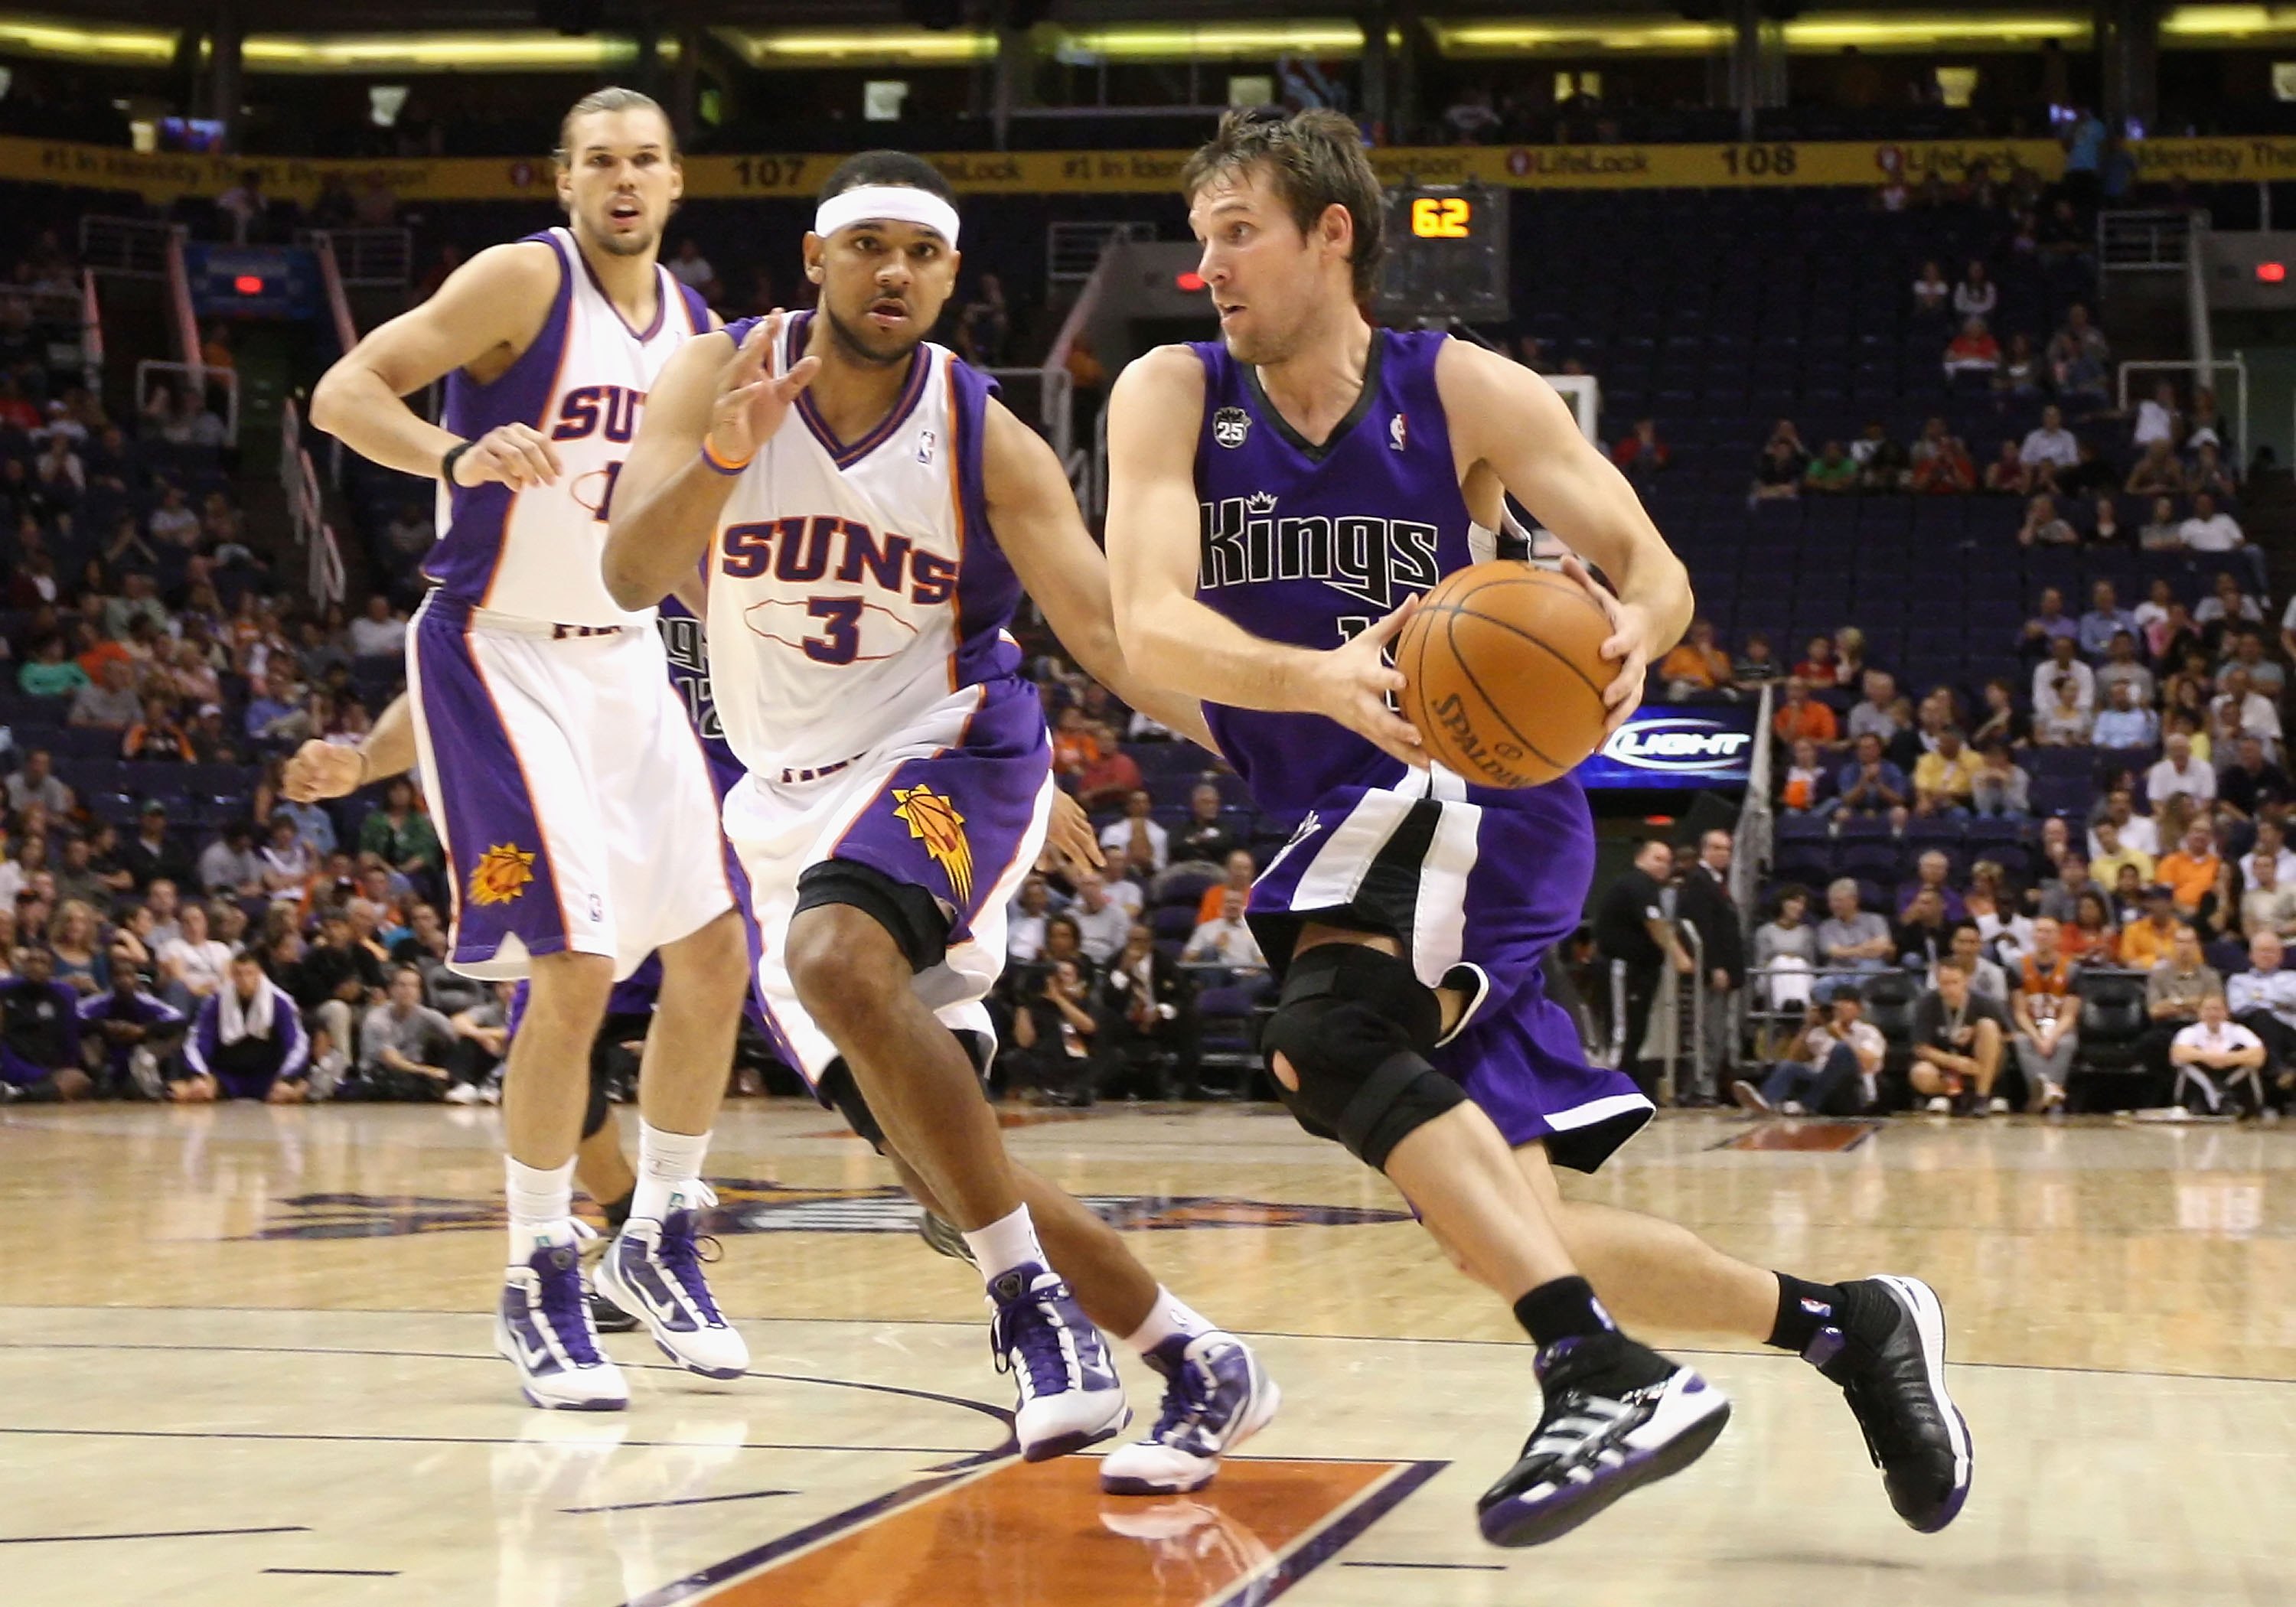 PHOENIX - OCTOBER 20:  Beno Udrih #19 of the Sacramento Kings drives the ball past Jared Dudley #3 of the Phoenix Suns during the NBA preseason game at US Airways Center on October 20, 2009 in Phoenix, Arizona. The Suns defeated the Kings 143-127.  NOTE T